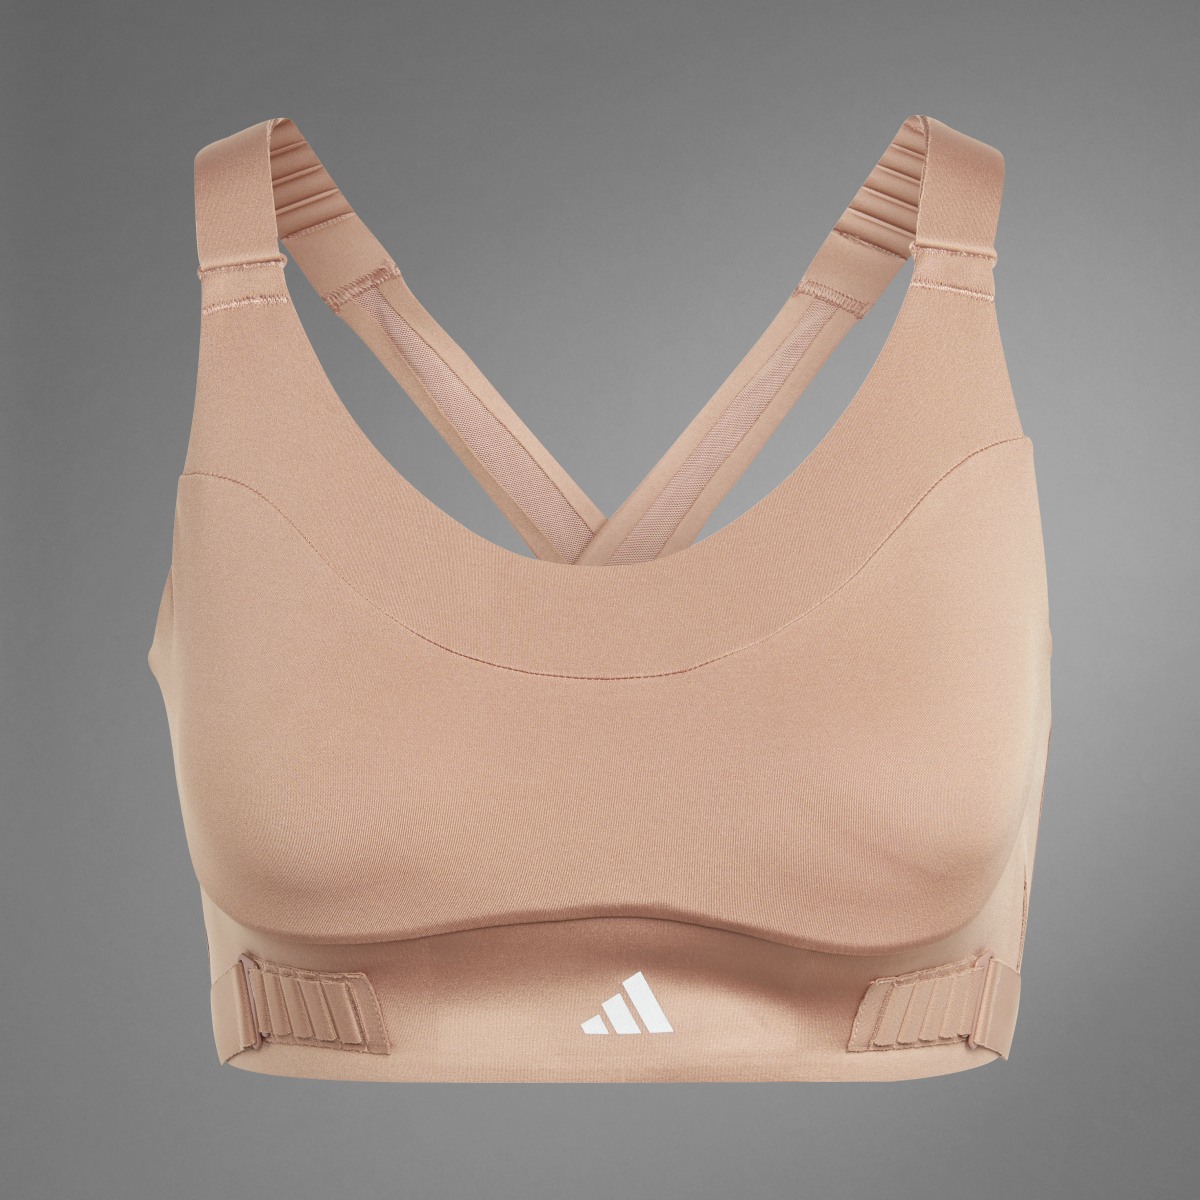 Adidas FastImpact Luxe High Support Bra. 10